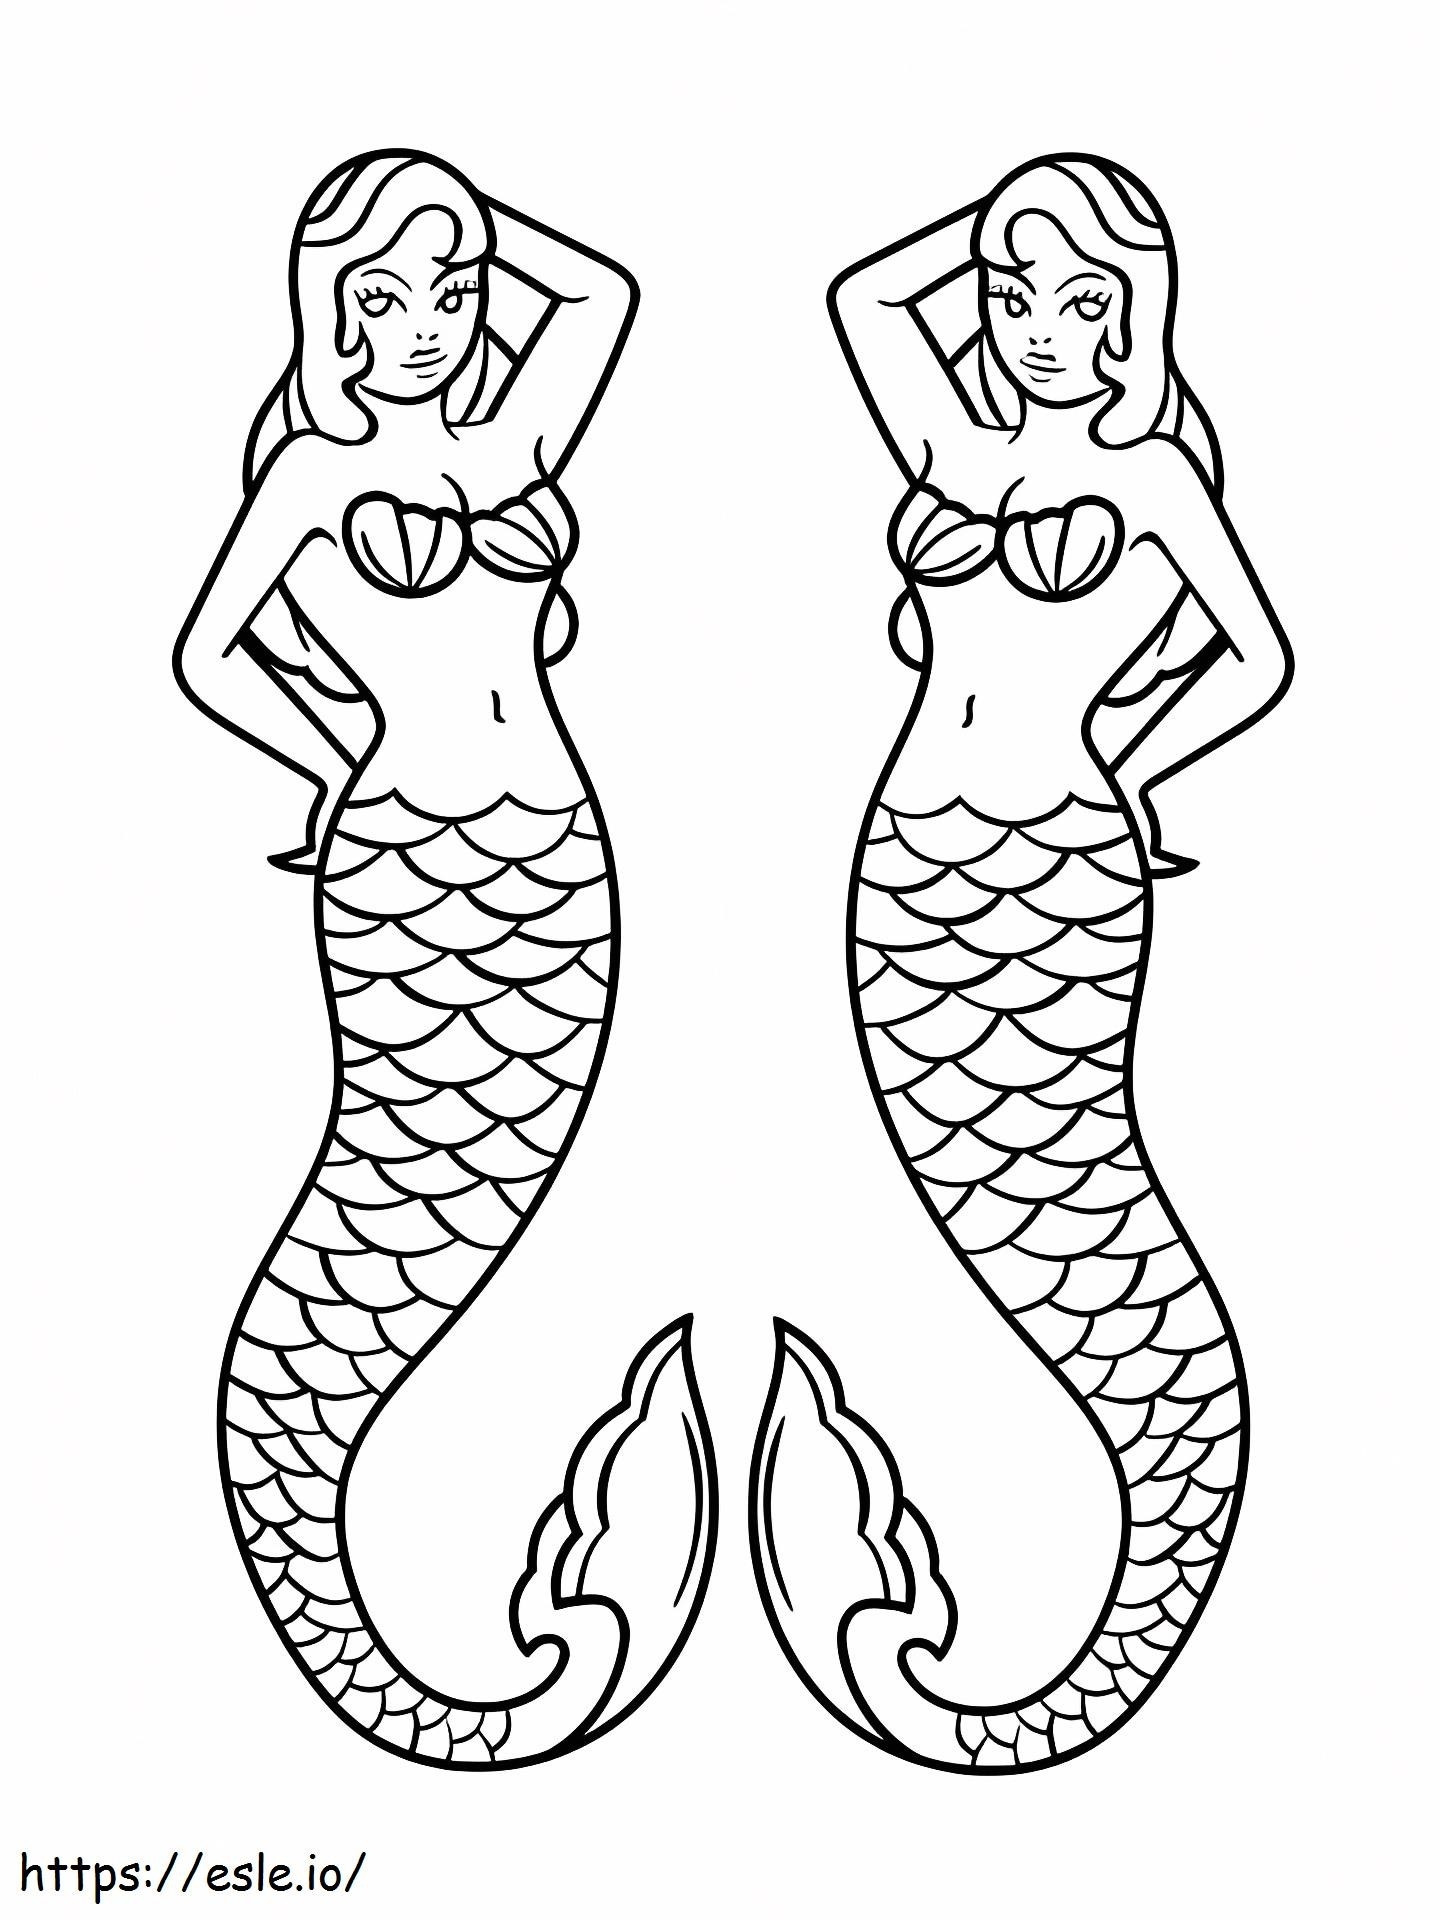 Two Mermaids coloring page